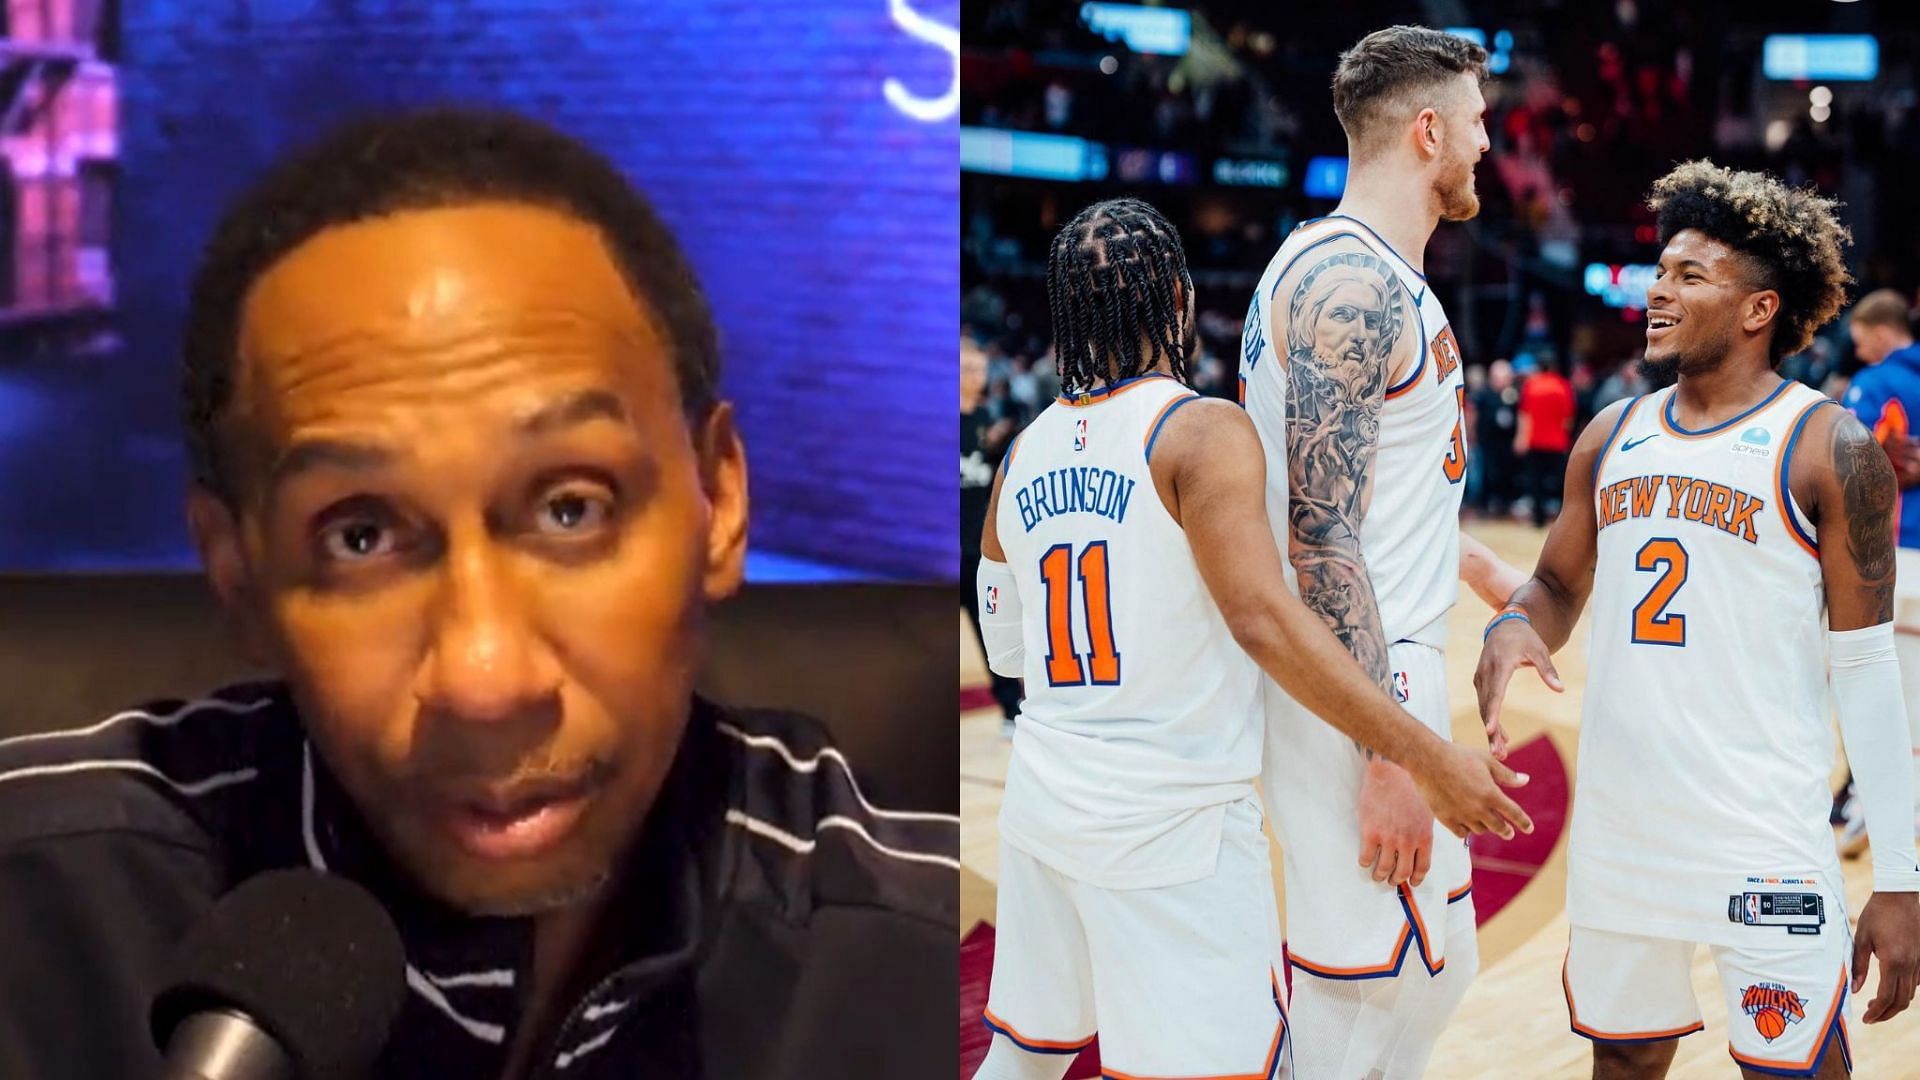 Stephen A. Smith gives comical reaction to idea of New York Knicks winning NBA championship